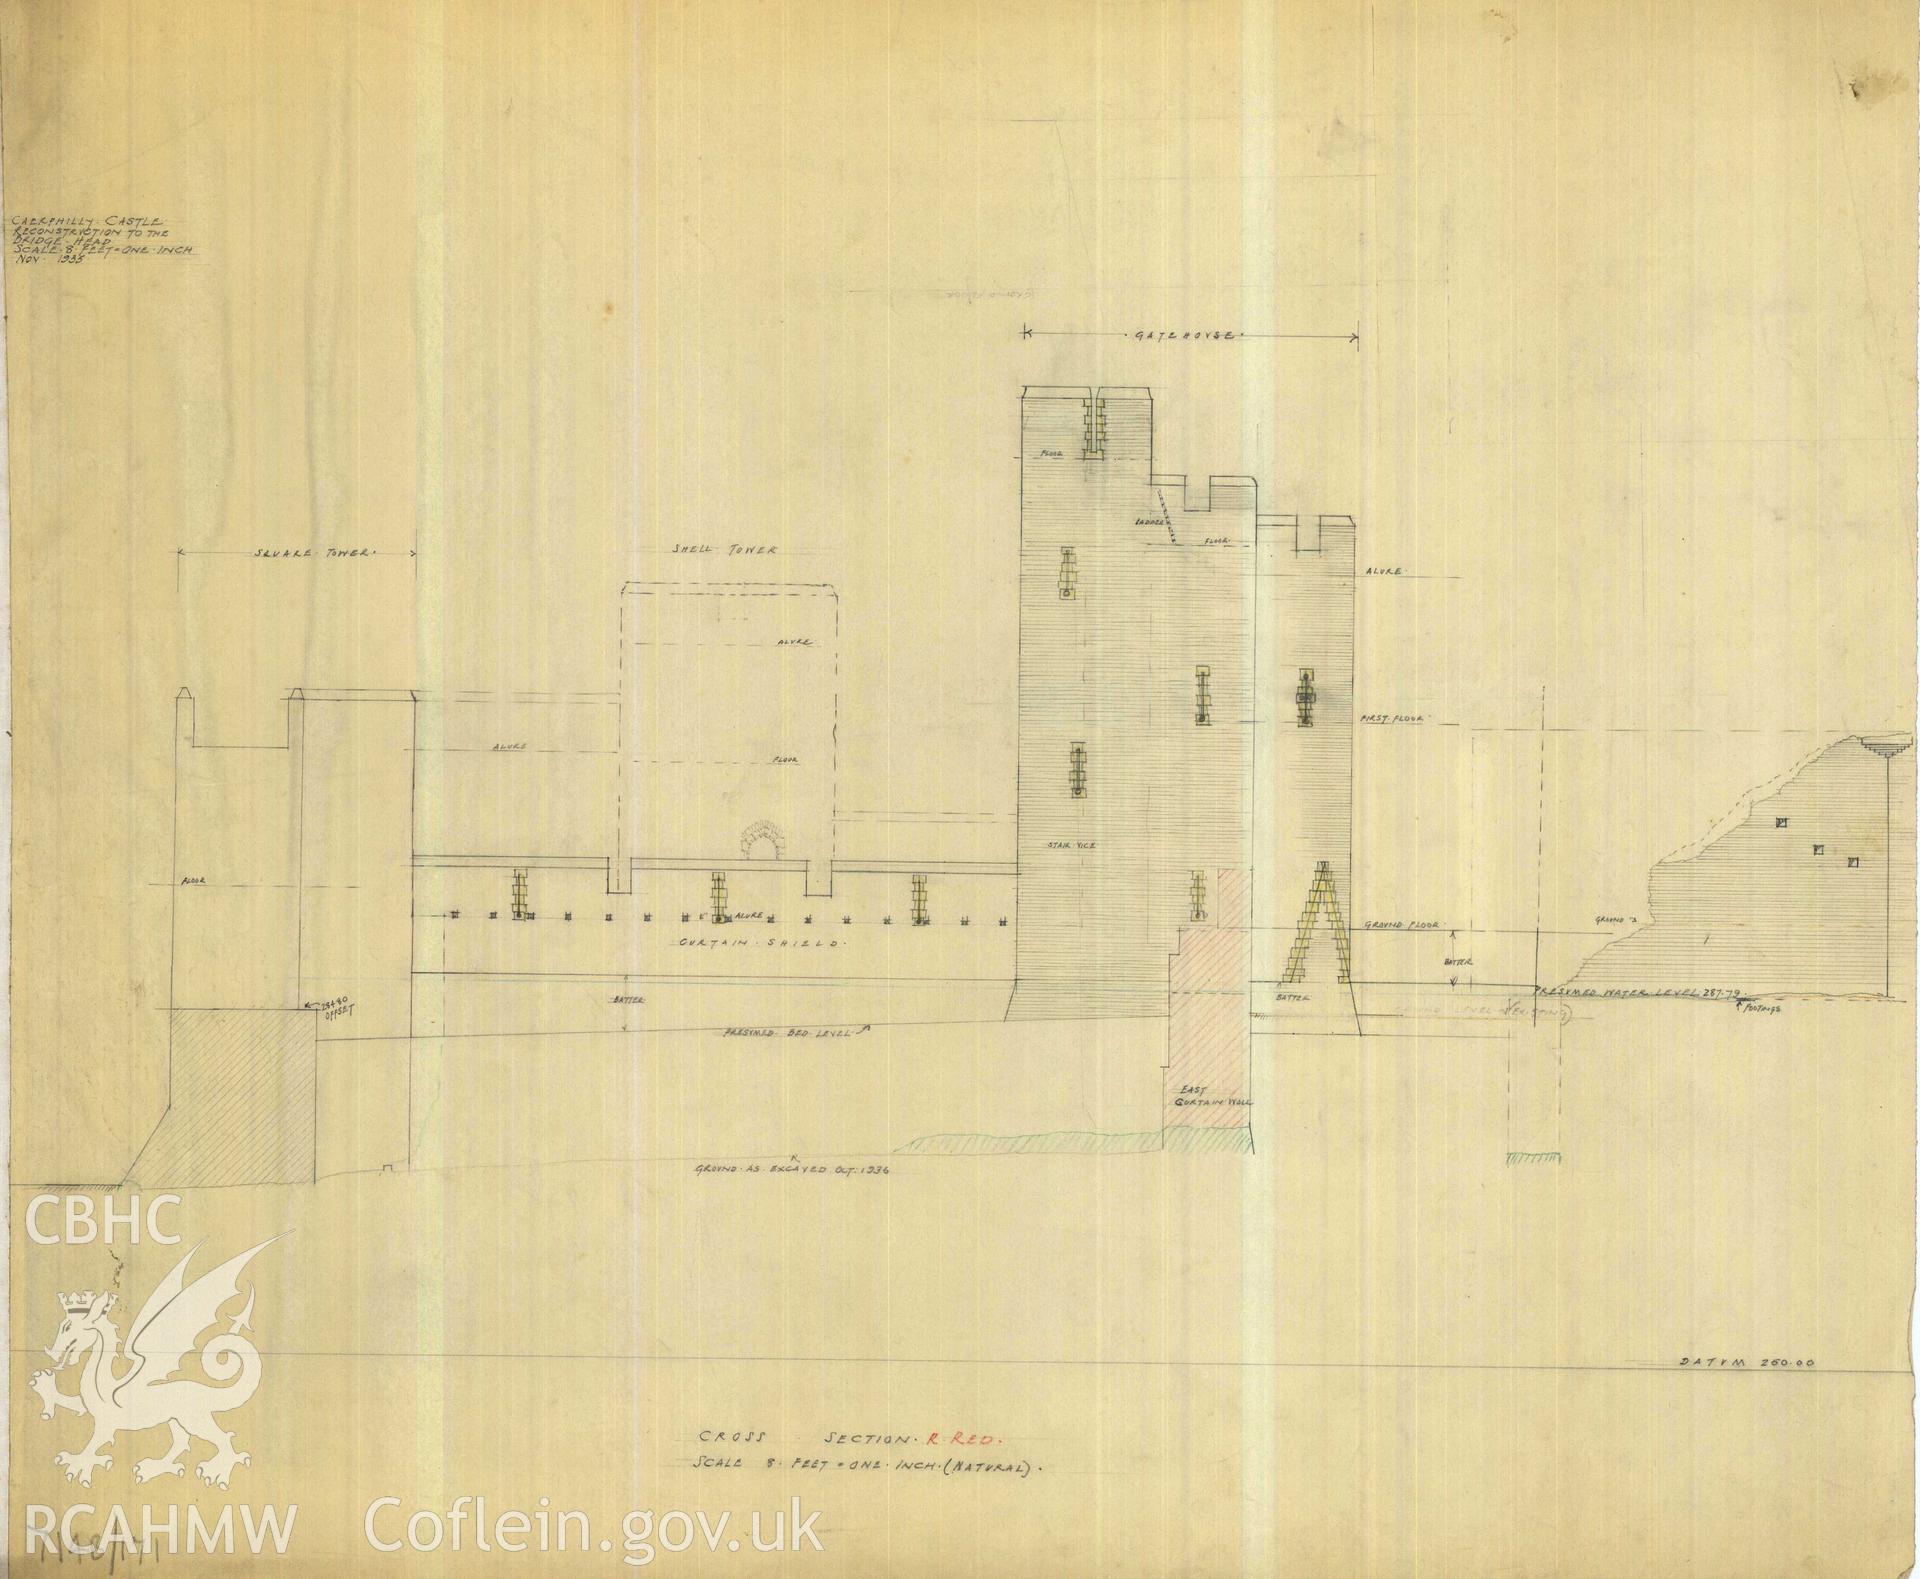 Cadw guardianship monument drawing of Caerphilly Castle. Dam, S gate, + tower, N elev. Cadw Ref. No:714B/171. Scale 1:96.